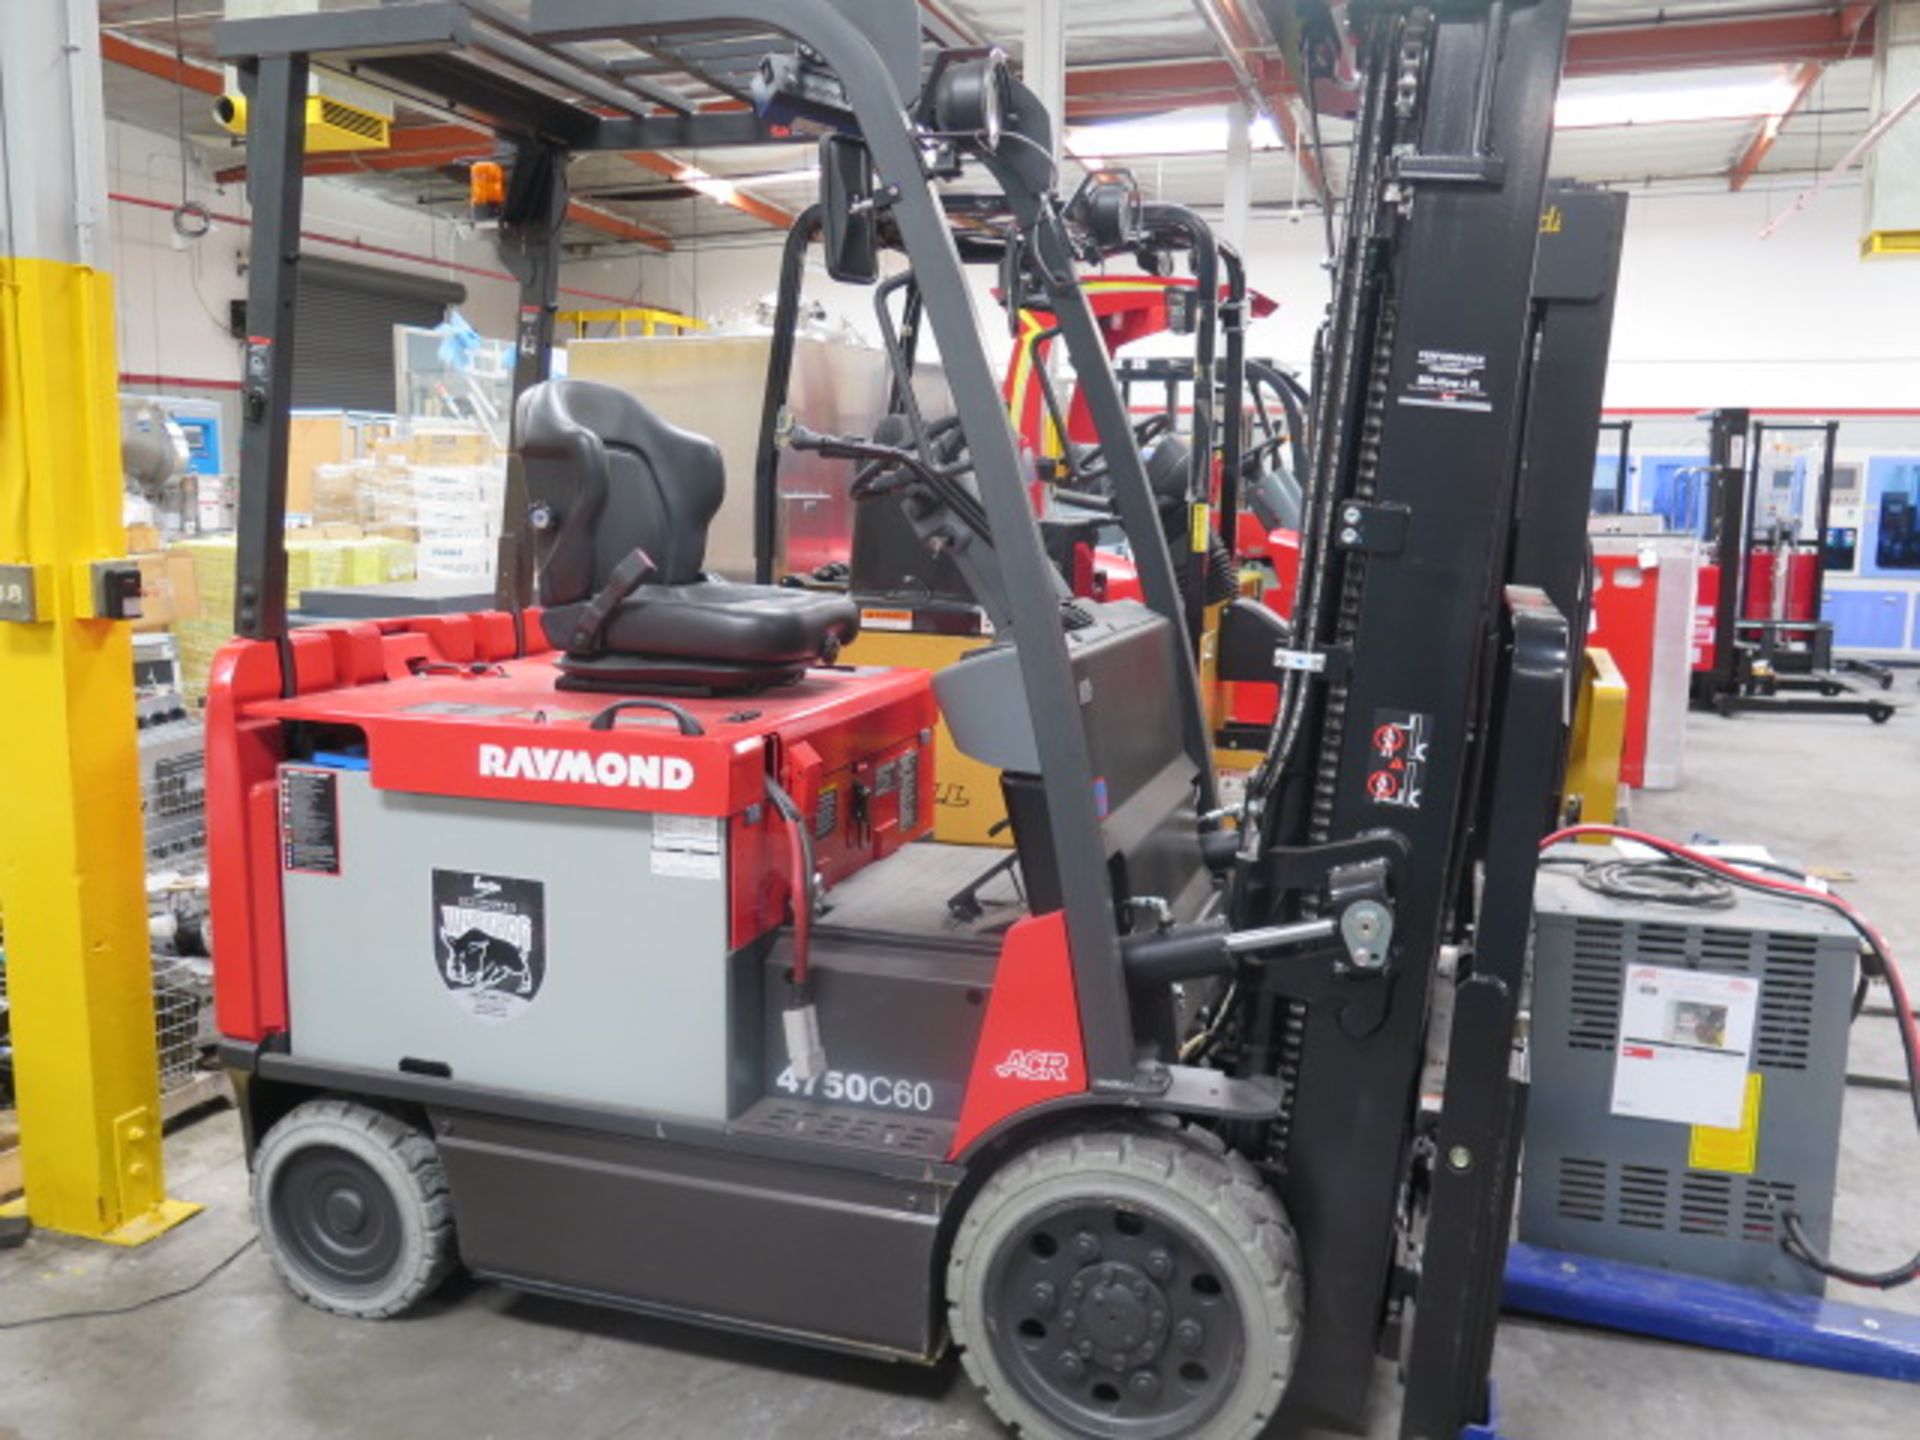 Raymond 4750C60 4750 Lb Cap Electric Forklift s/n 475-6-10129 w/ 3-Stage Mast, 187” Lift, SOLD AS IS - Image 2 of 17